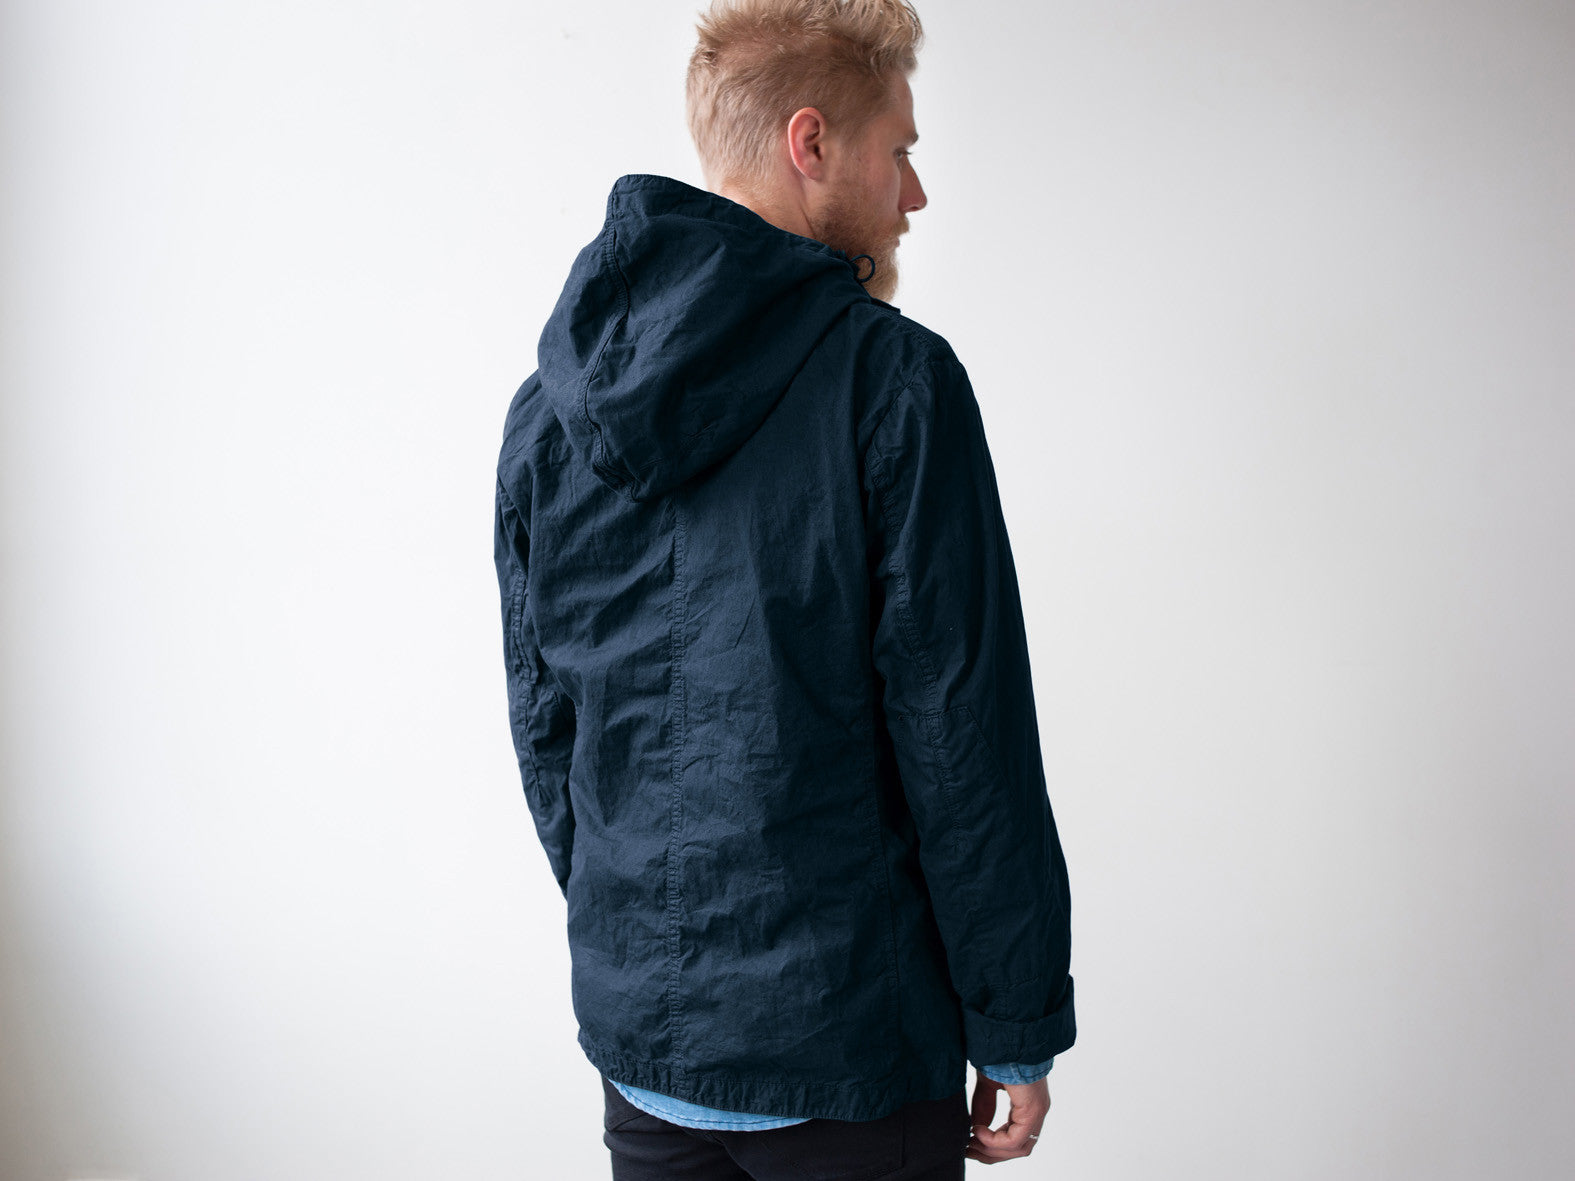 PACIFIC SHELL JACKET. NAVY BLUE